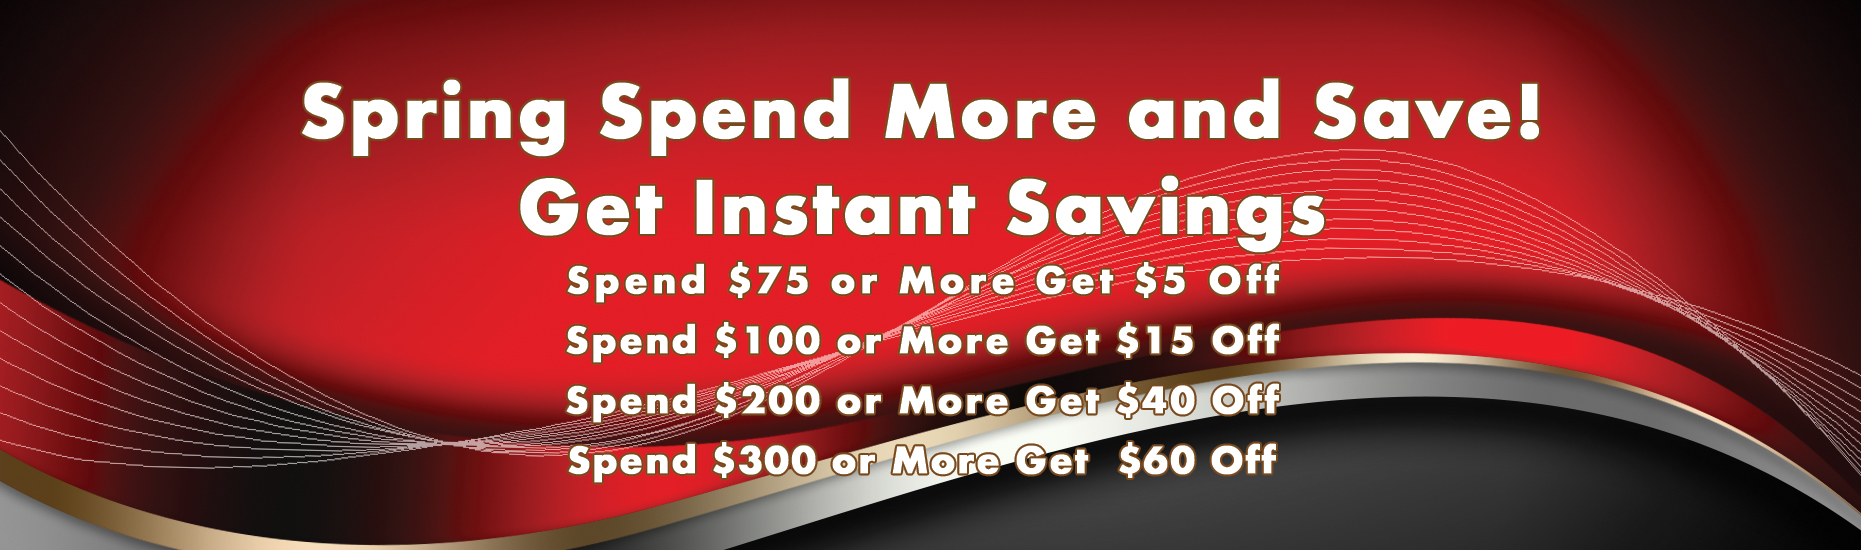 Spring Spend More and Save! Get Instant Savings!